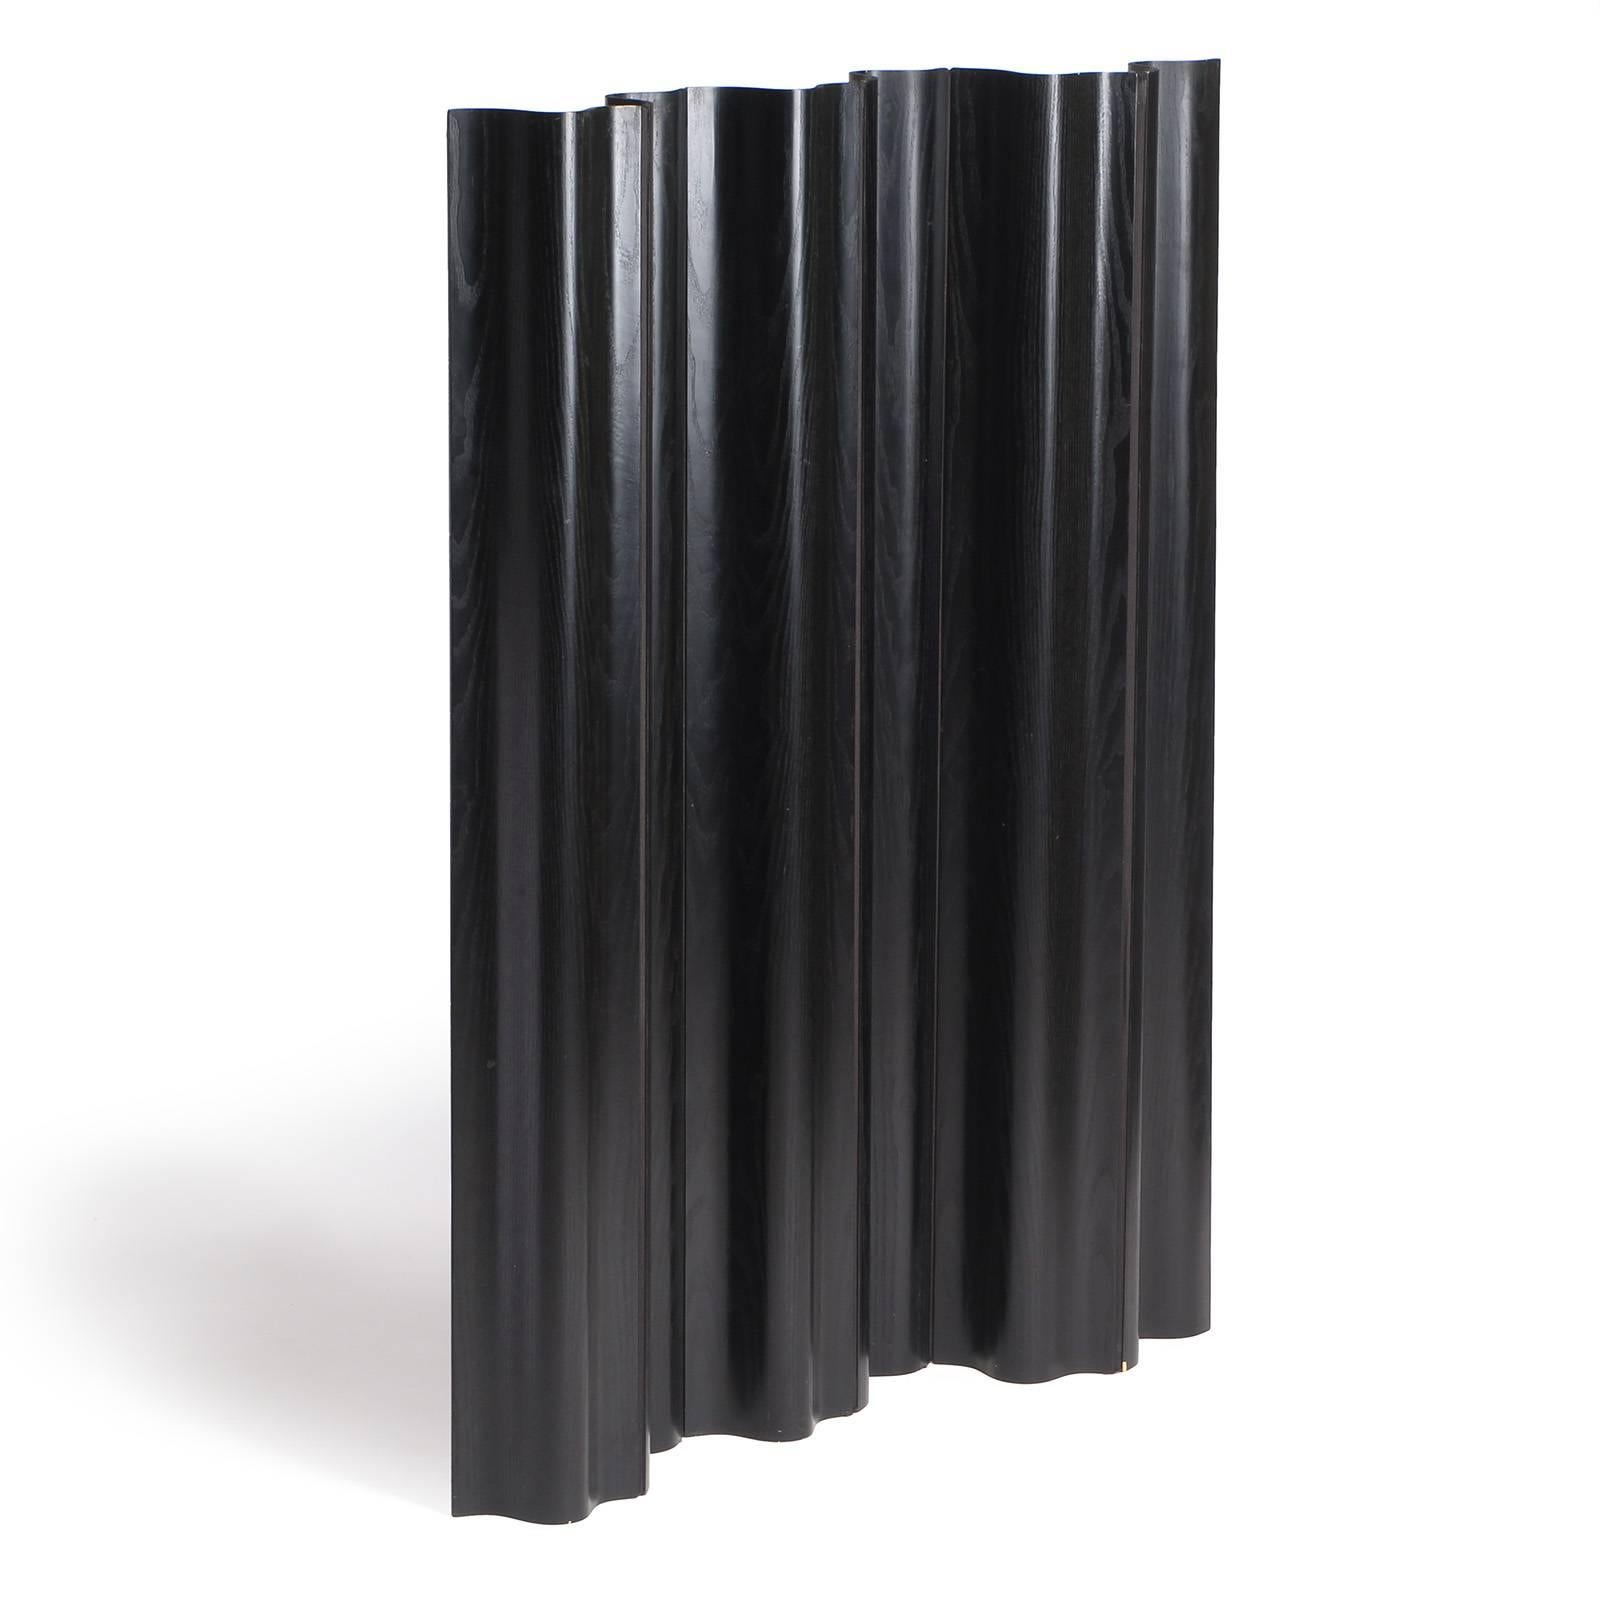 An undulating and adjustable six panel molded plywood screen, black satined ash panels connected by fabric 